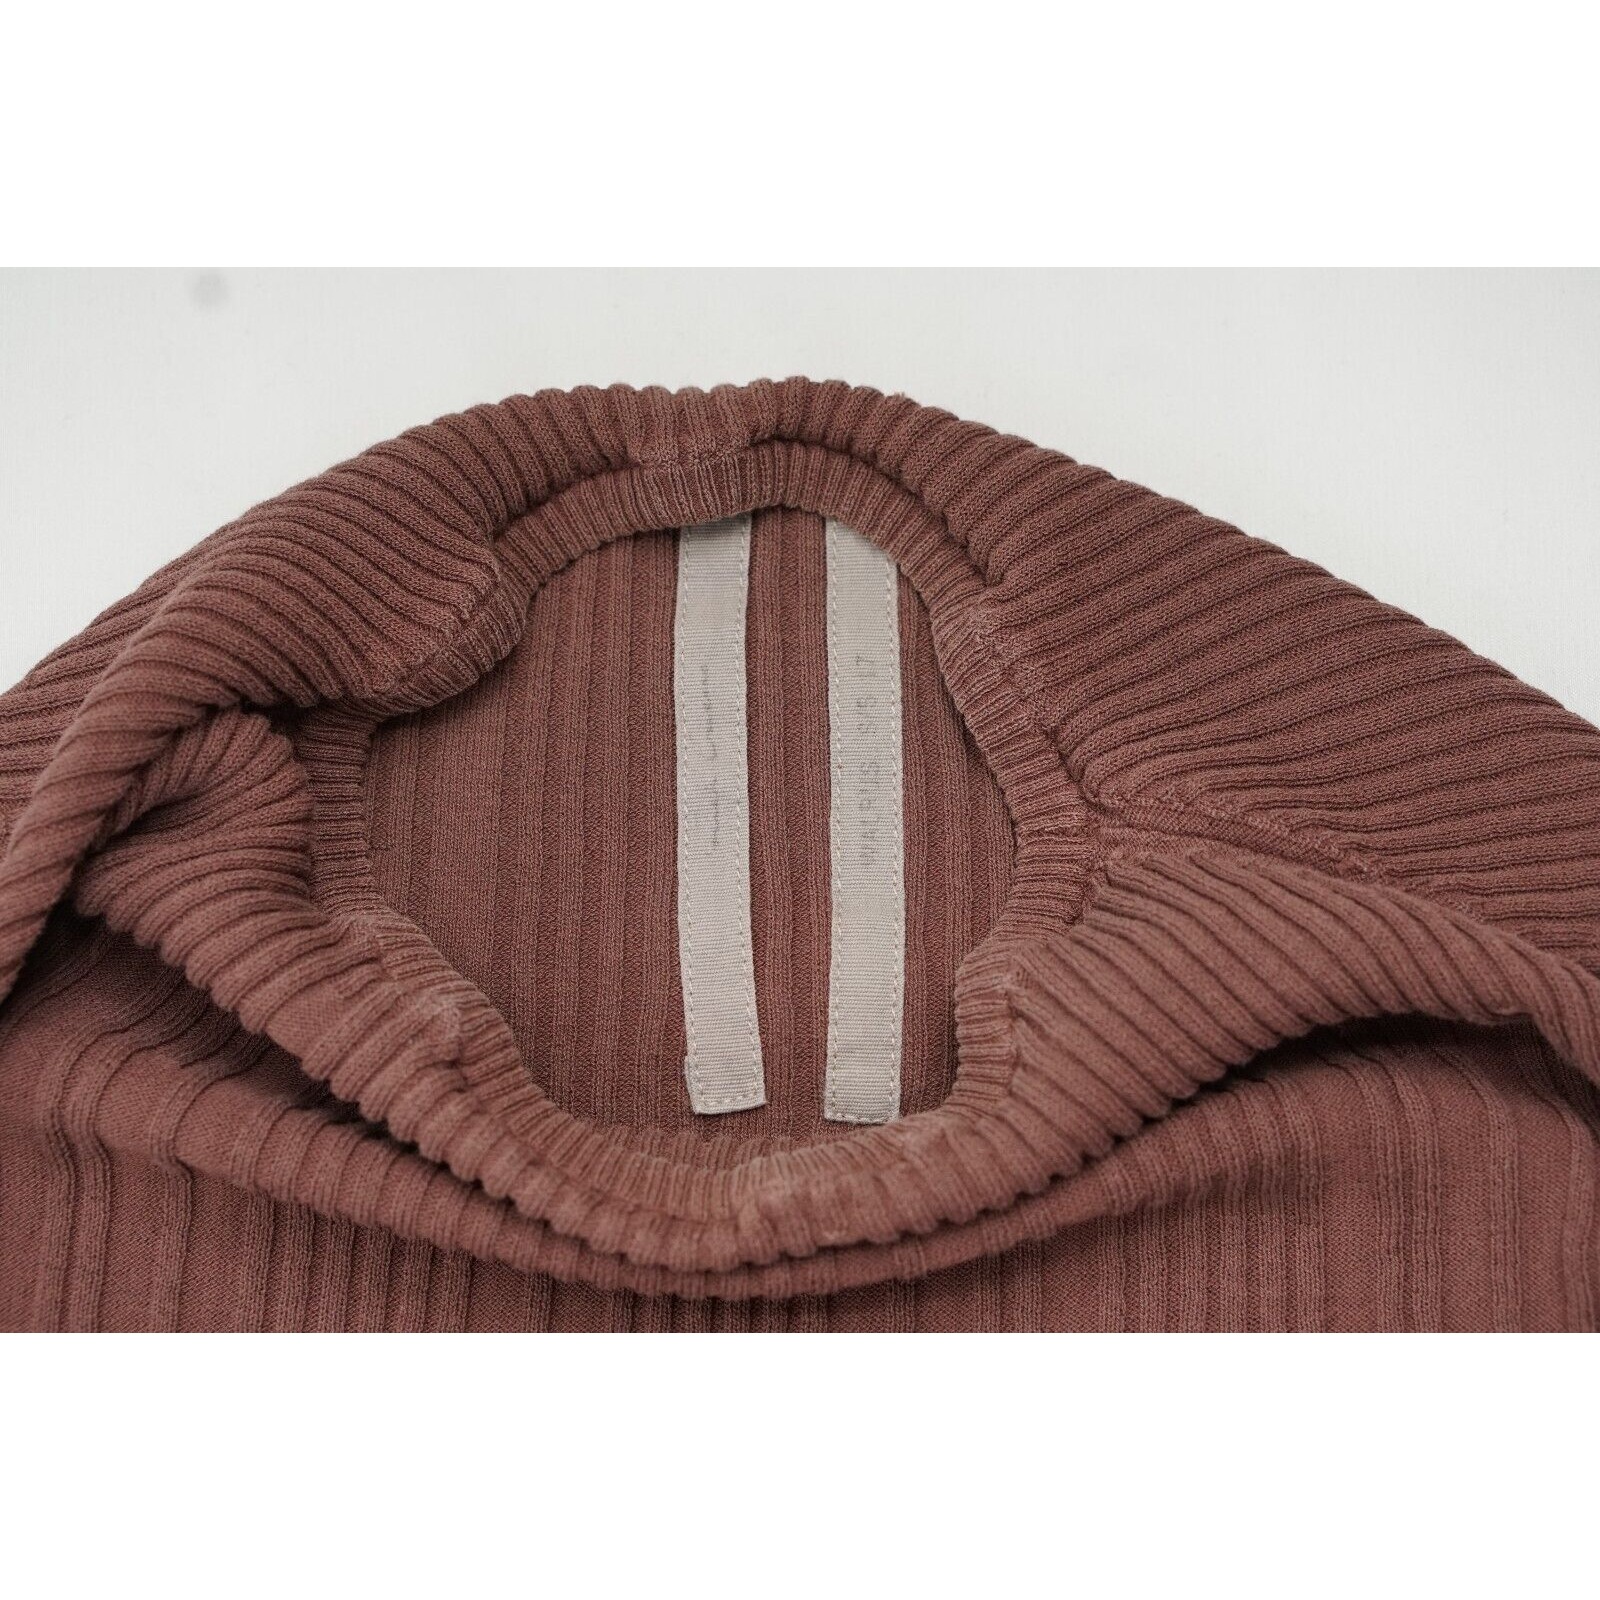 Ribbed Sweater SS17 Walrus Throat Burgundy Red - 2